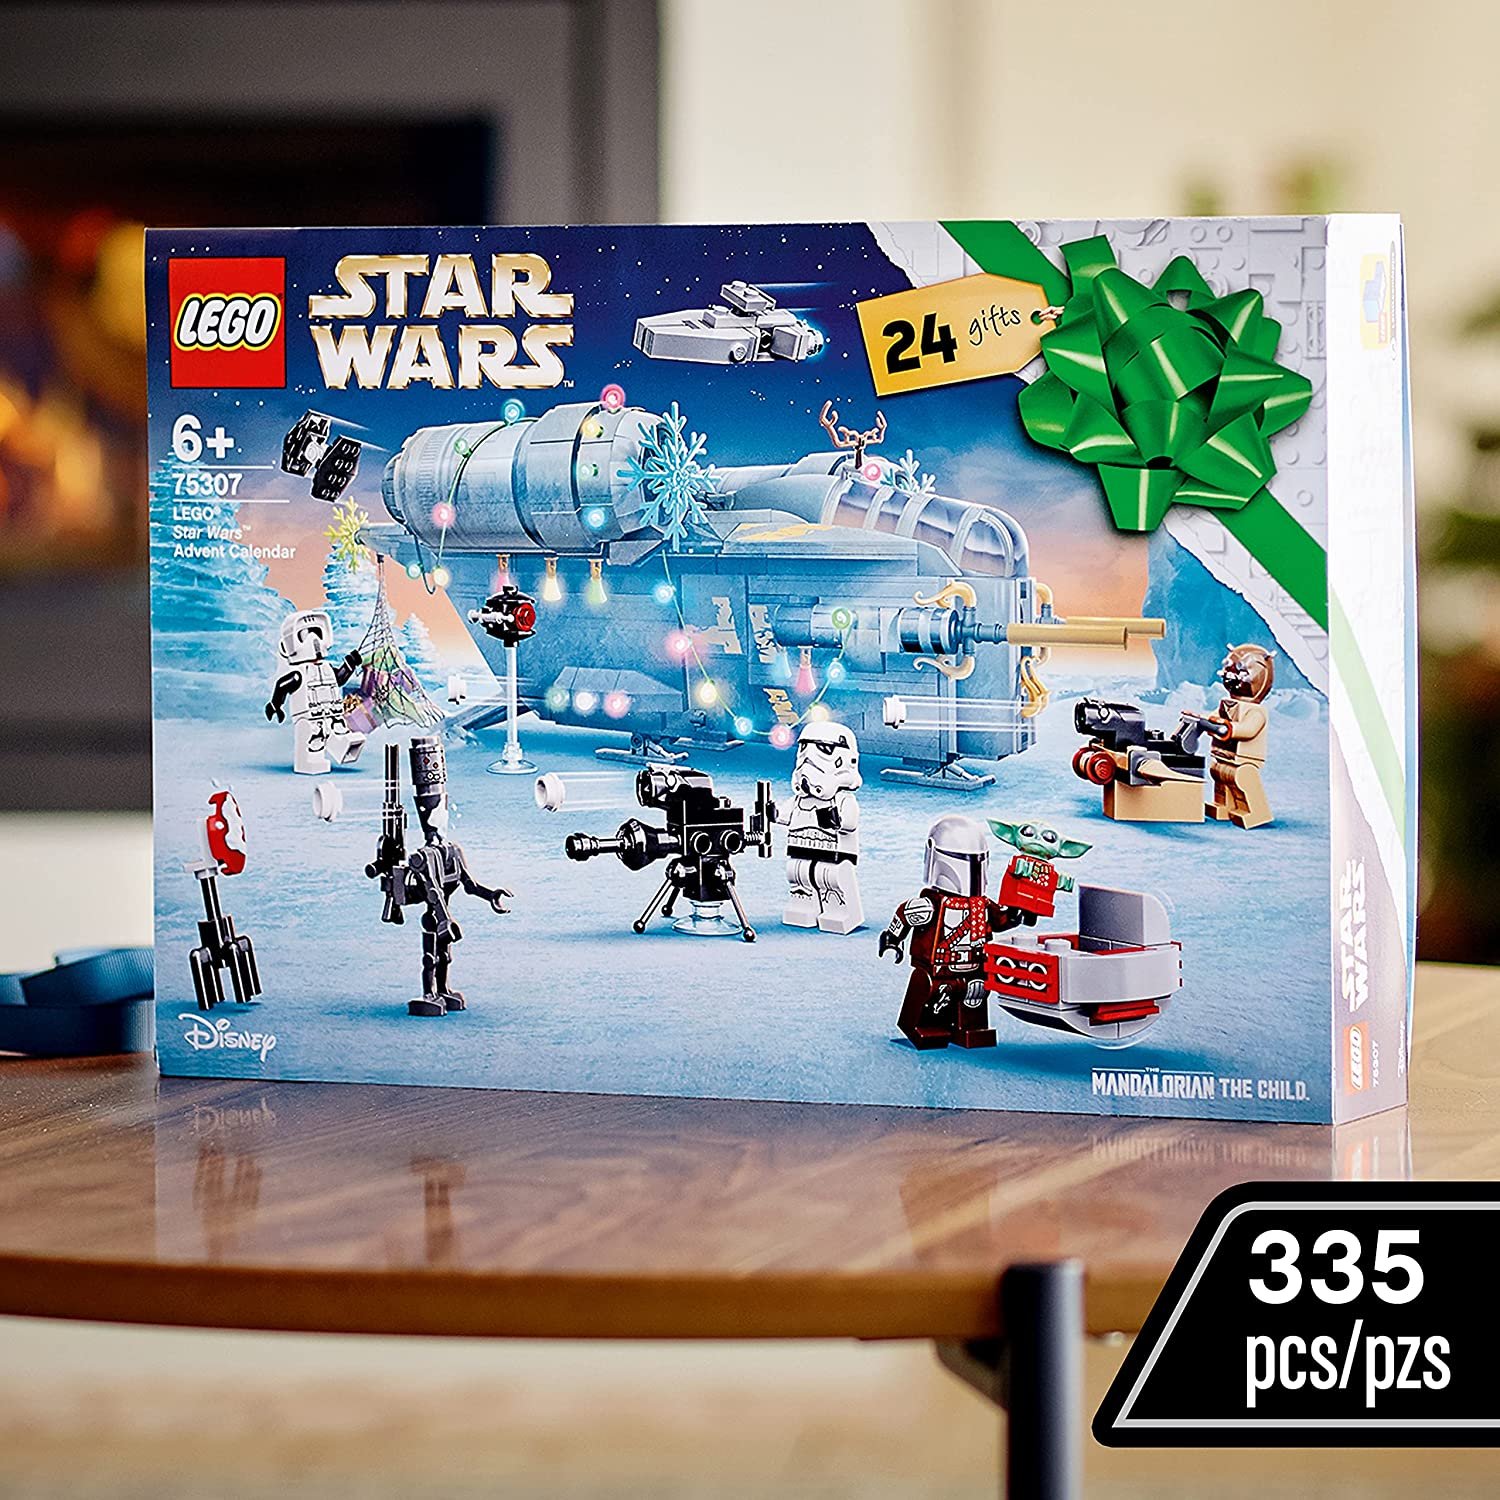 LEGO Star Wars Advent Calendar 75307 Building Toy for Kids (335 Pieces) - image 3 of 7